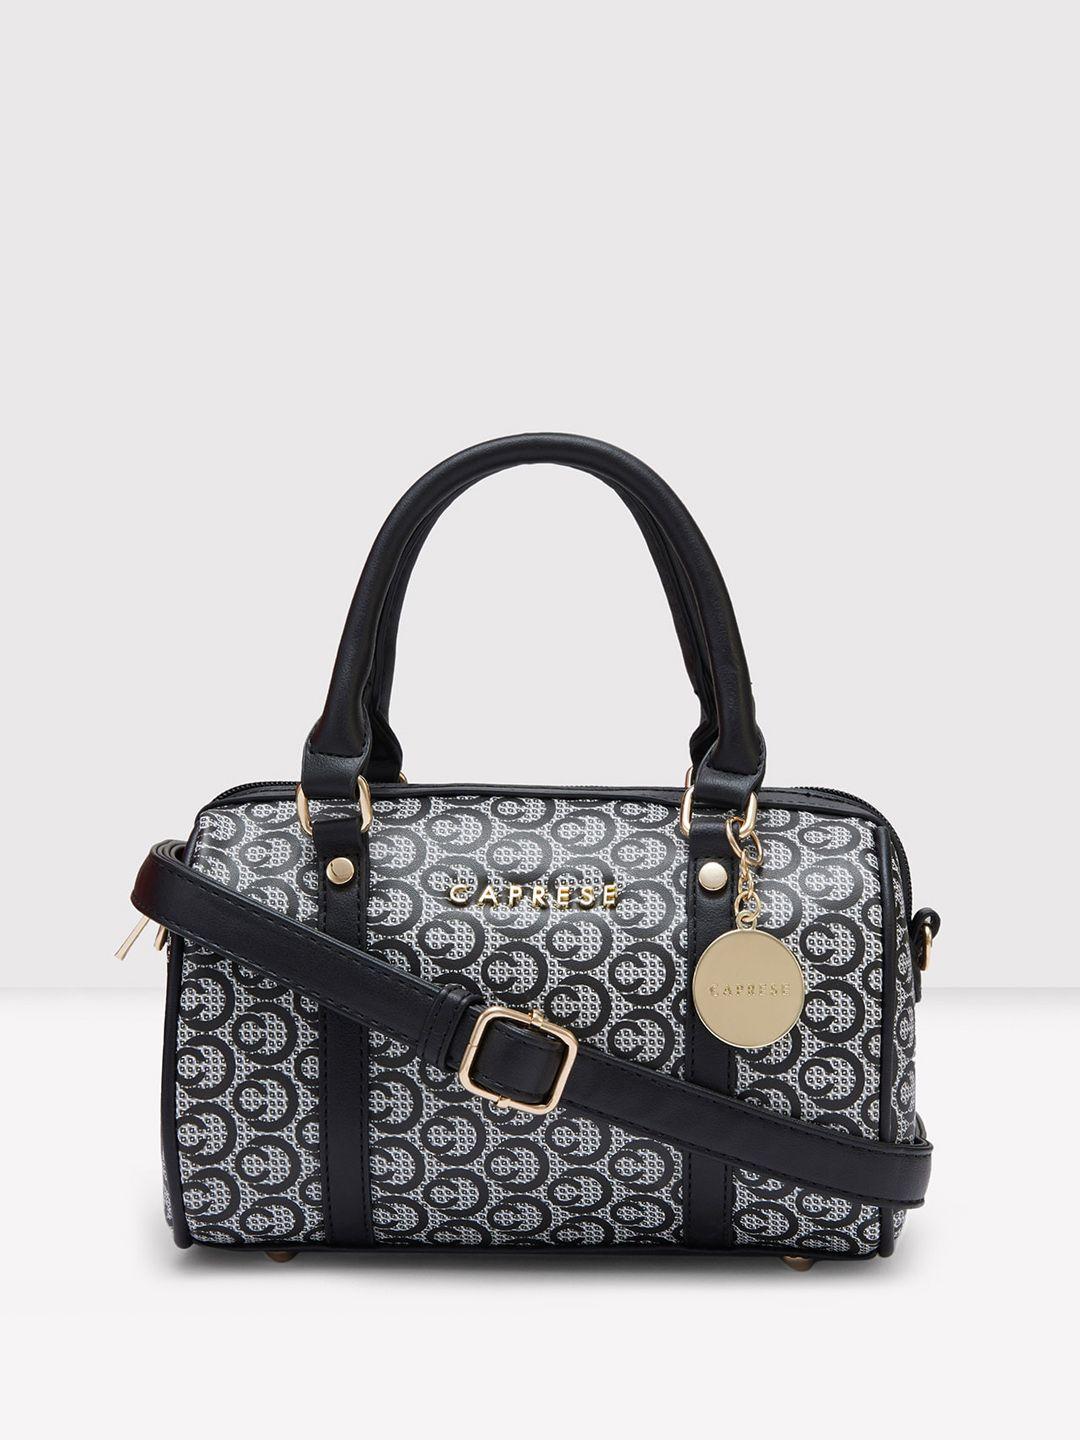 caprese typography printed leather structured satchel bag